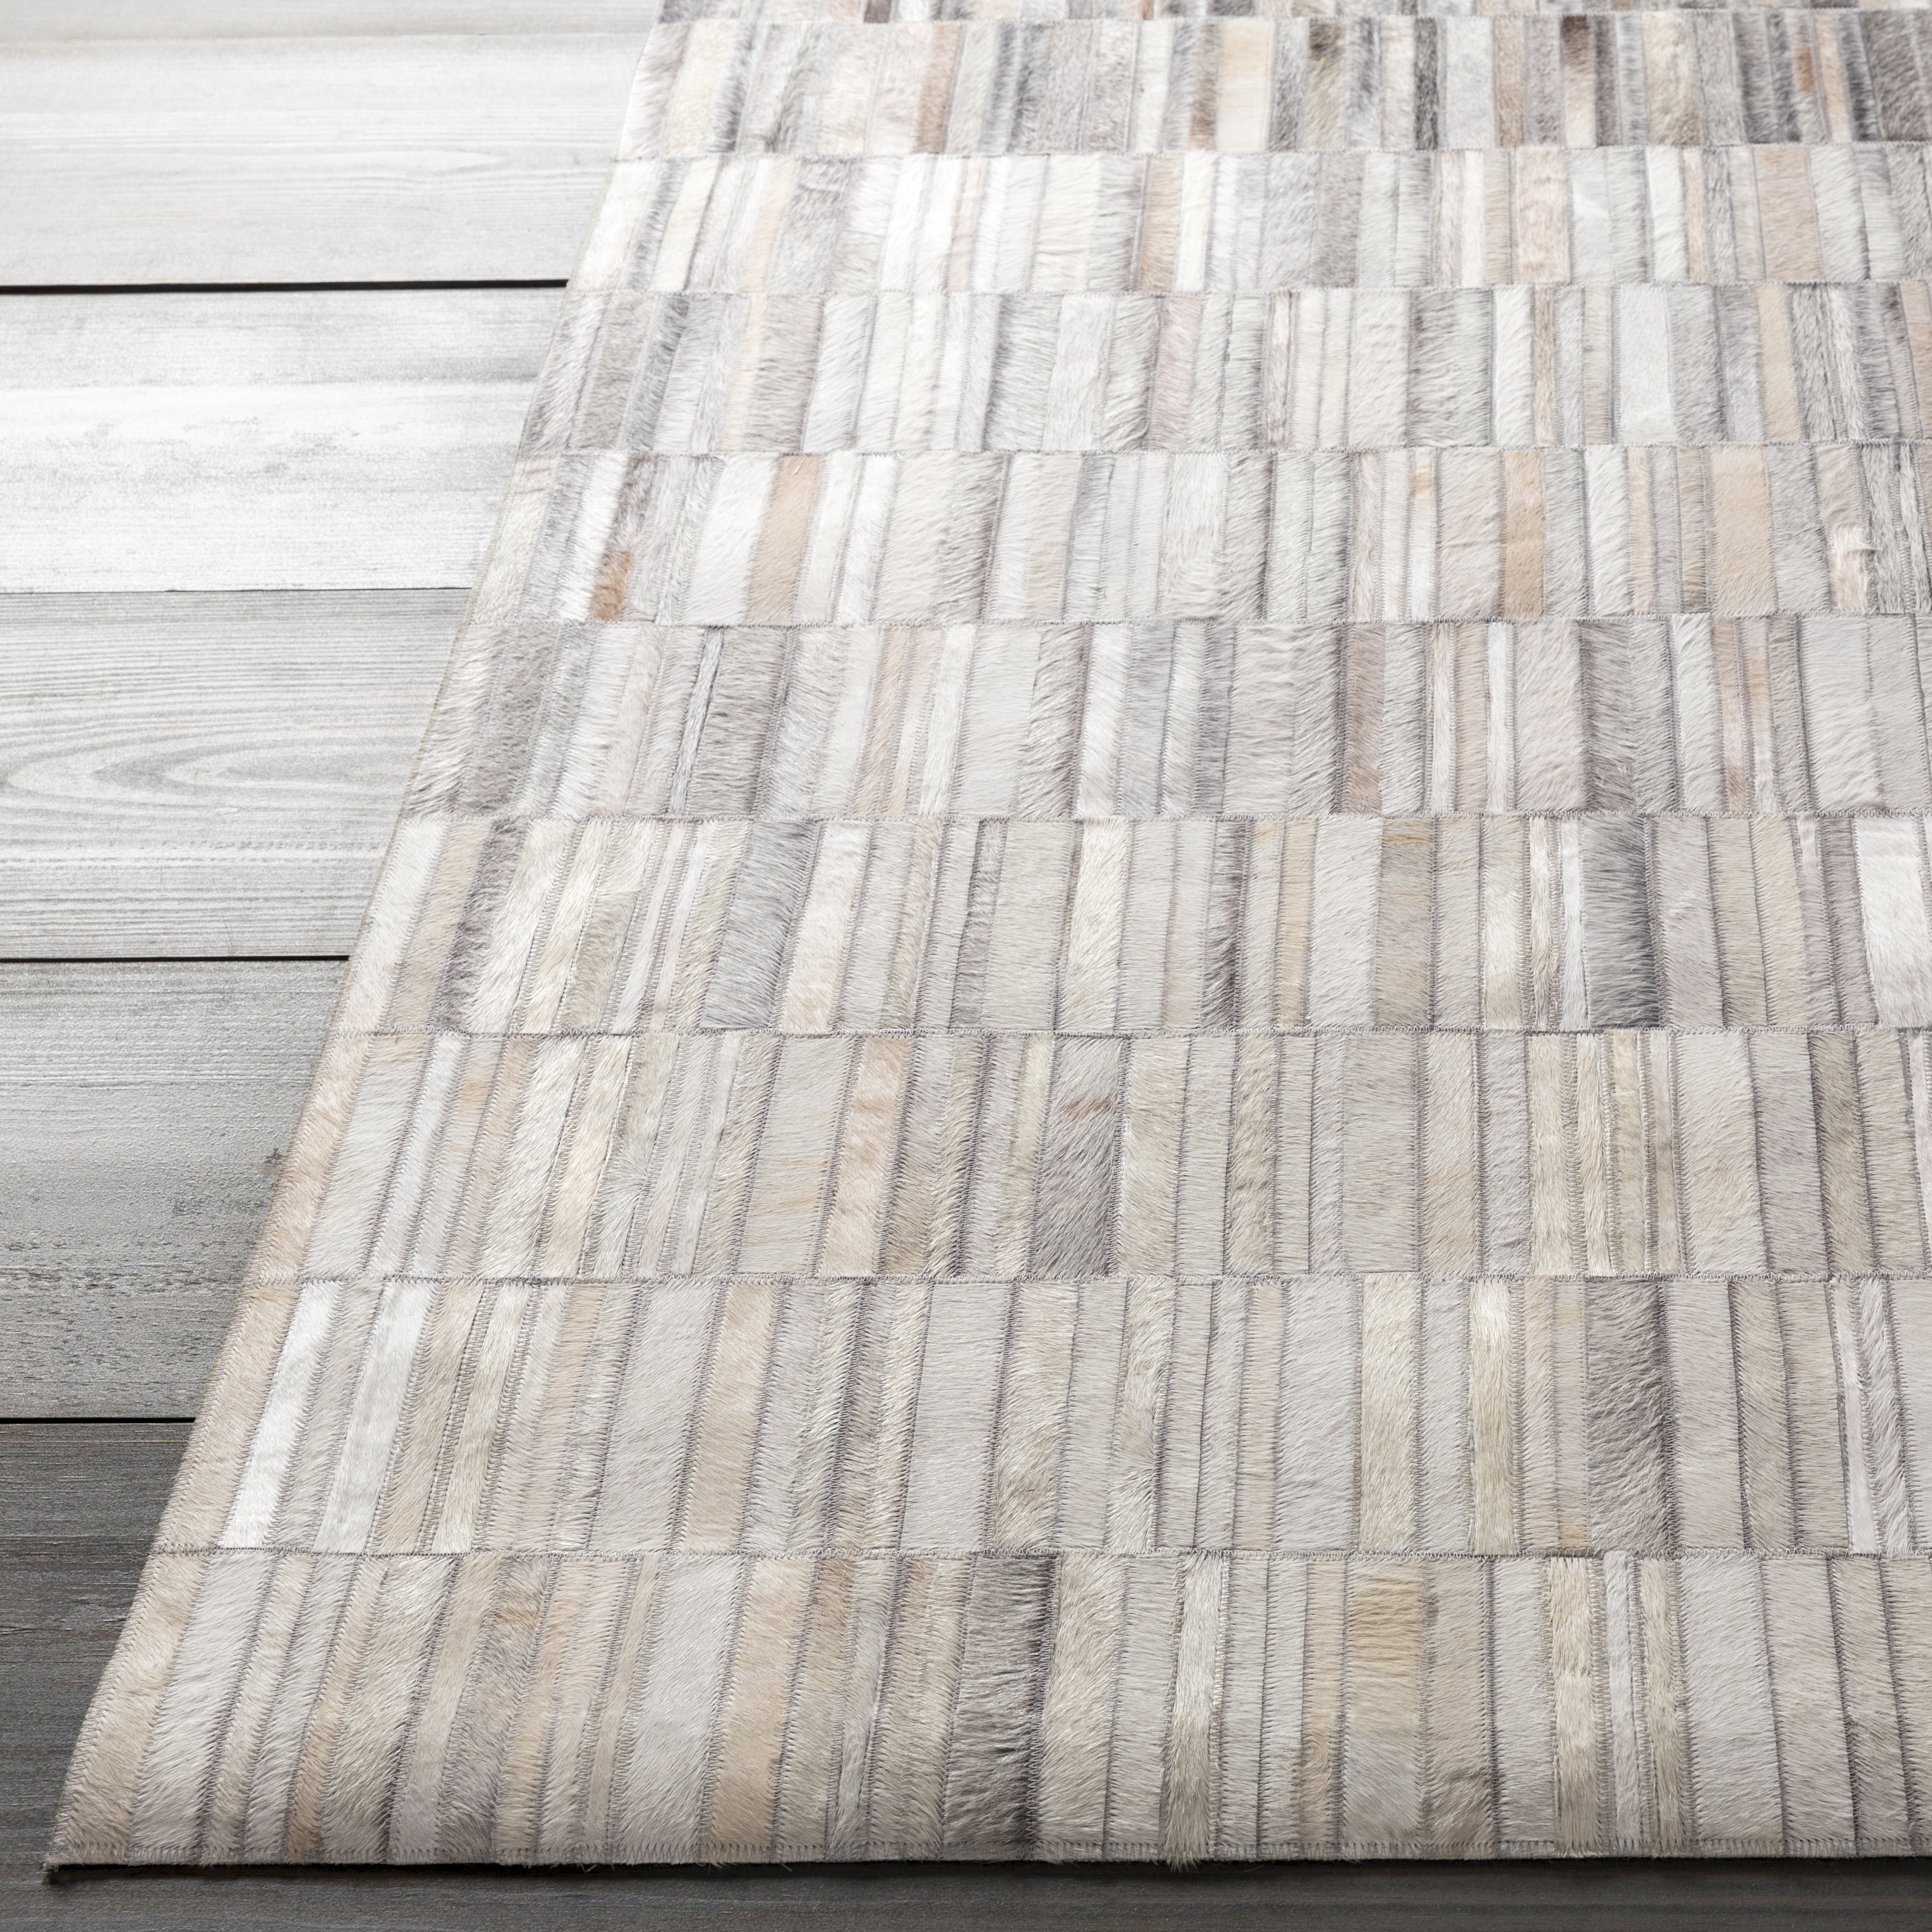 Outback Rug, 5' x 8' - Image 1